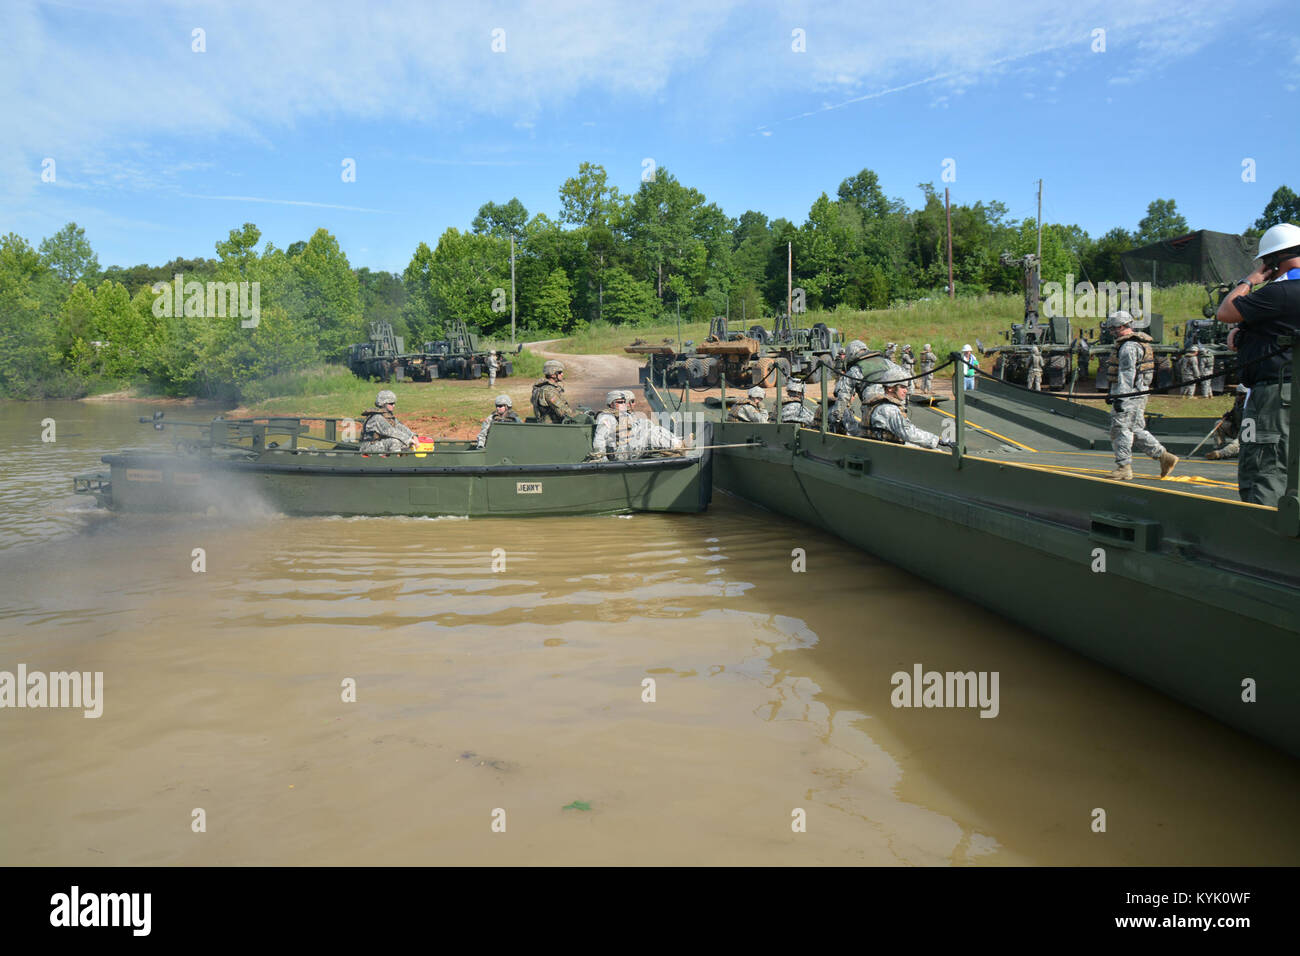 A SSG David Fox of the 2061st Multi Role Bridge Company pilots a MK2 boat to move a float built from an improved ribbon bridge as part of their annual training at Fort Knox Kentucky on 15 Jul 2016. (Kentucky National Guard photo by Walt Leaumont) Stock Photo